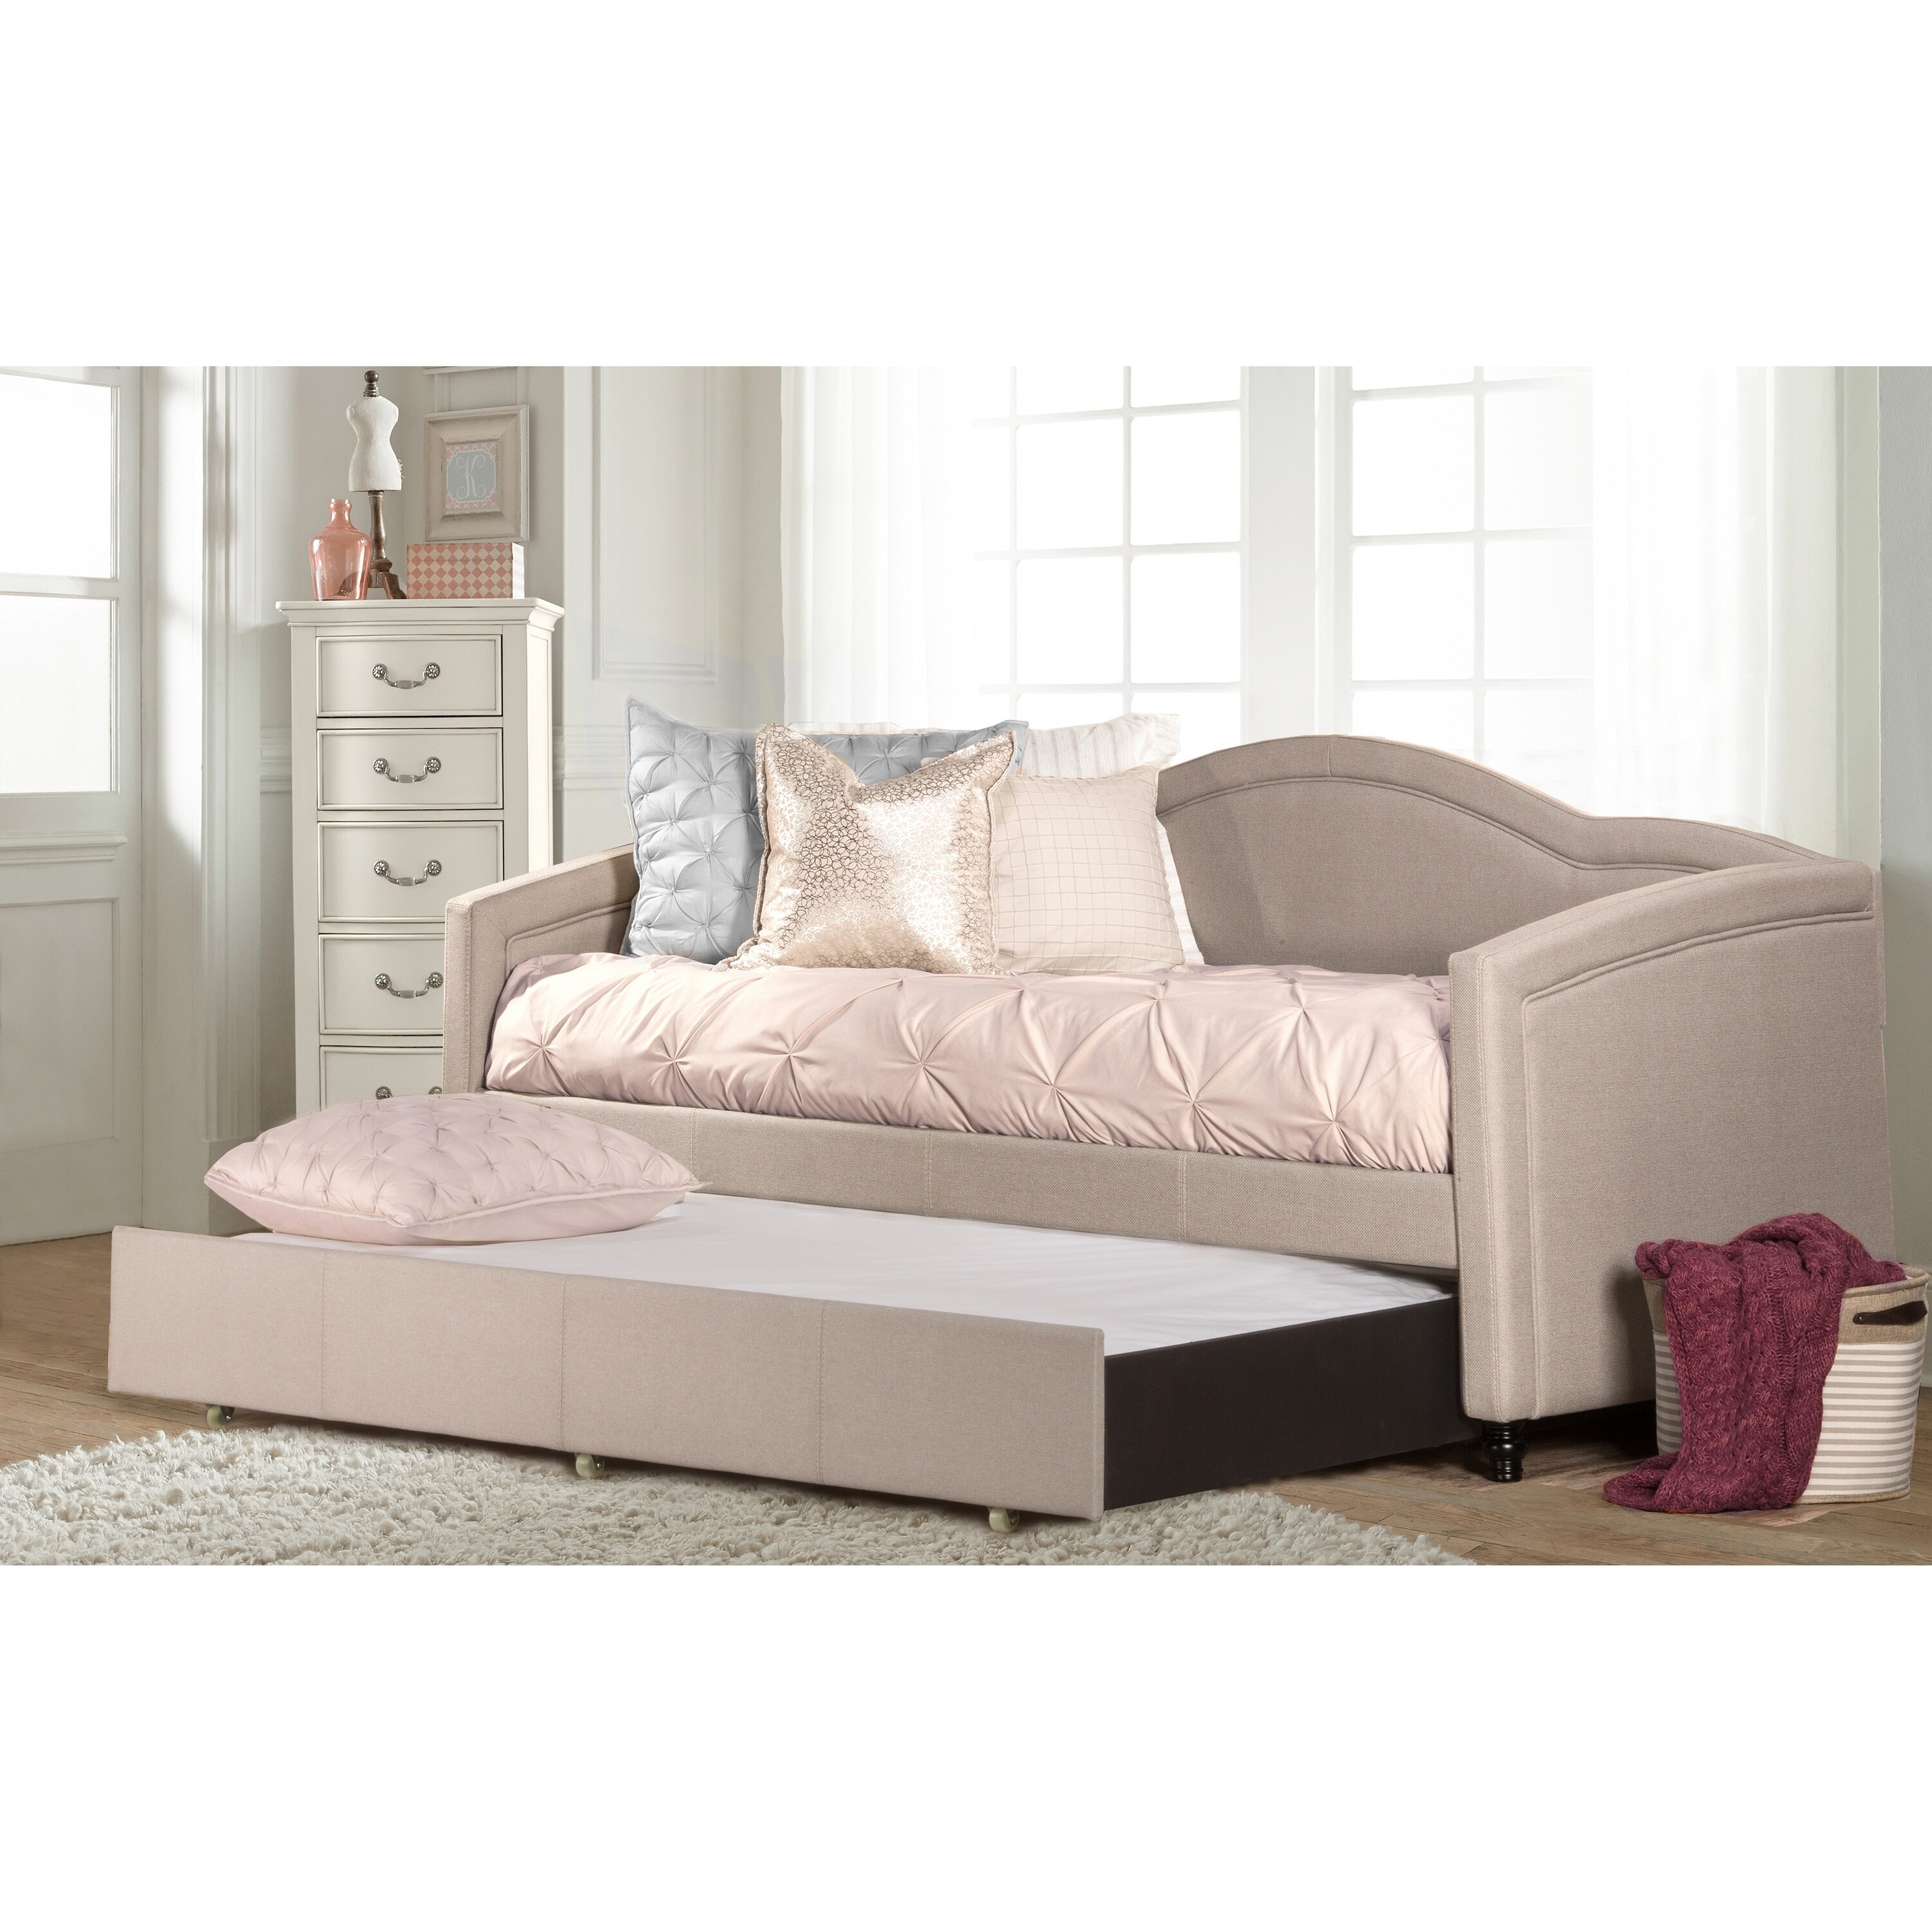 Hillsdale Furniture Jasmine Dove Grey Daybed With Trundle Dove Gray 